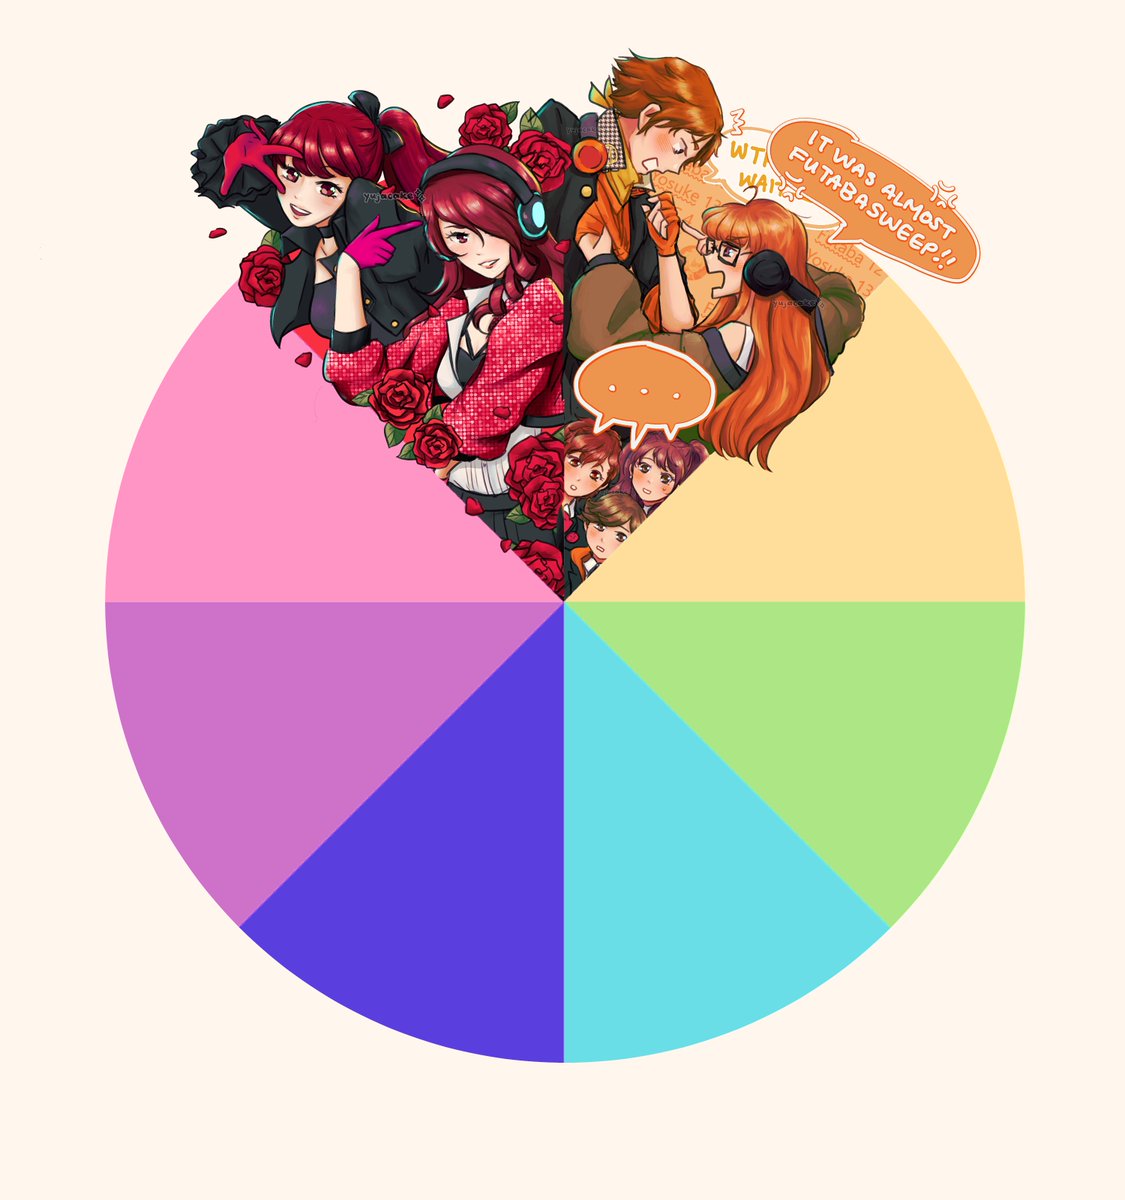 something sillier for orange with yosuke and futaba ft. femc + rise + ken 🍊🧡
suggest persona characters for yellow? only going to do 2 this time tho 🧍
#colorwheelchallenge #Persona3 #Persona4 #Persona5